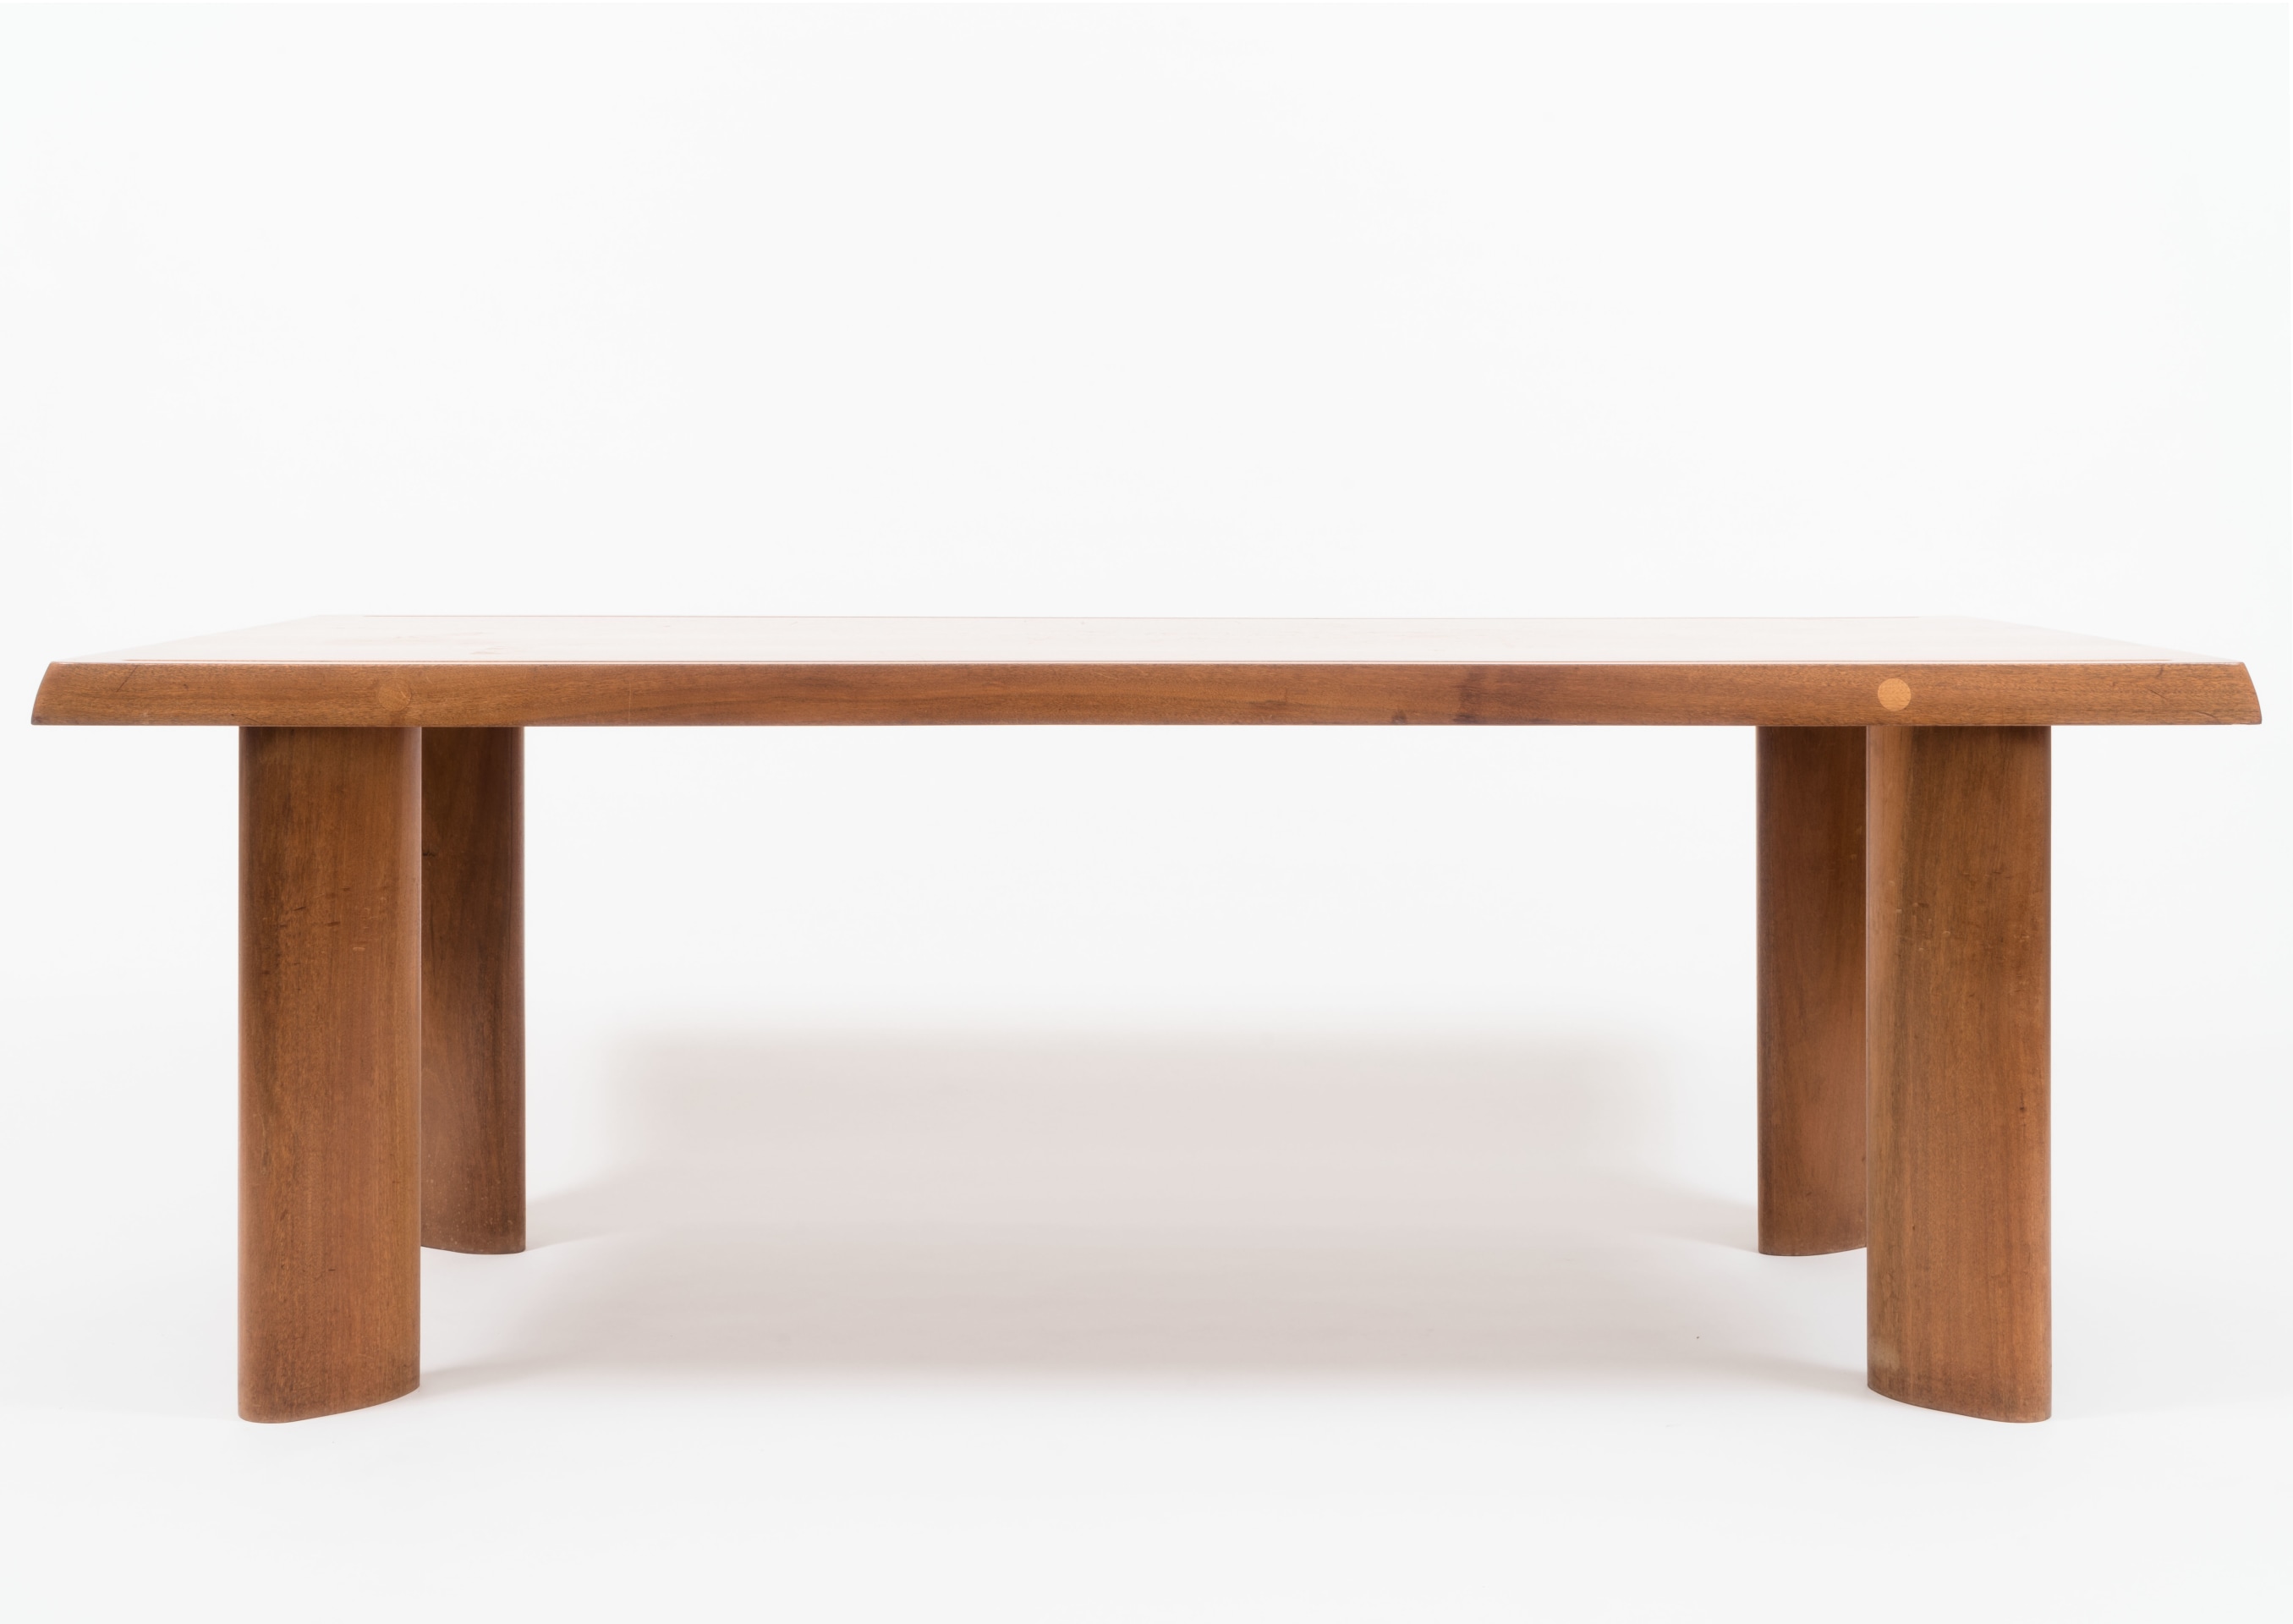 Charlotte Perriand, Dining table, model a gorges (1958)